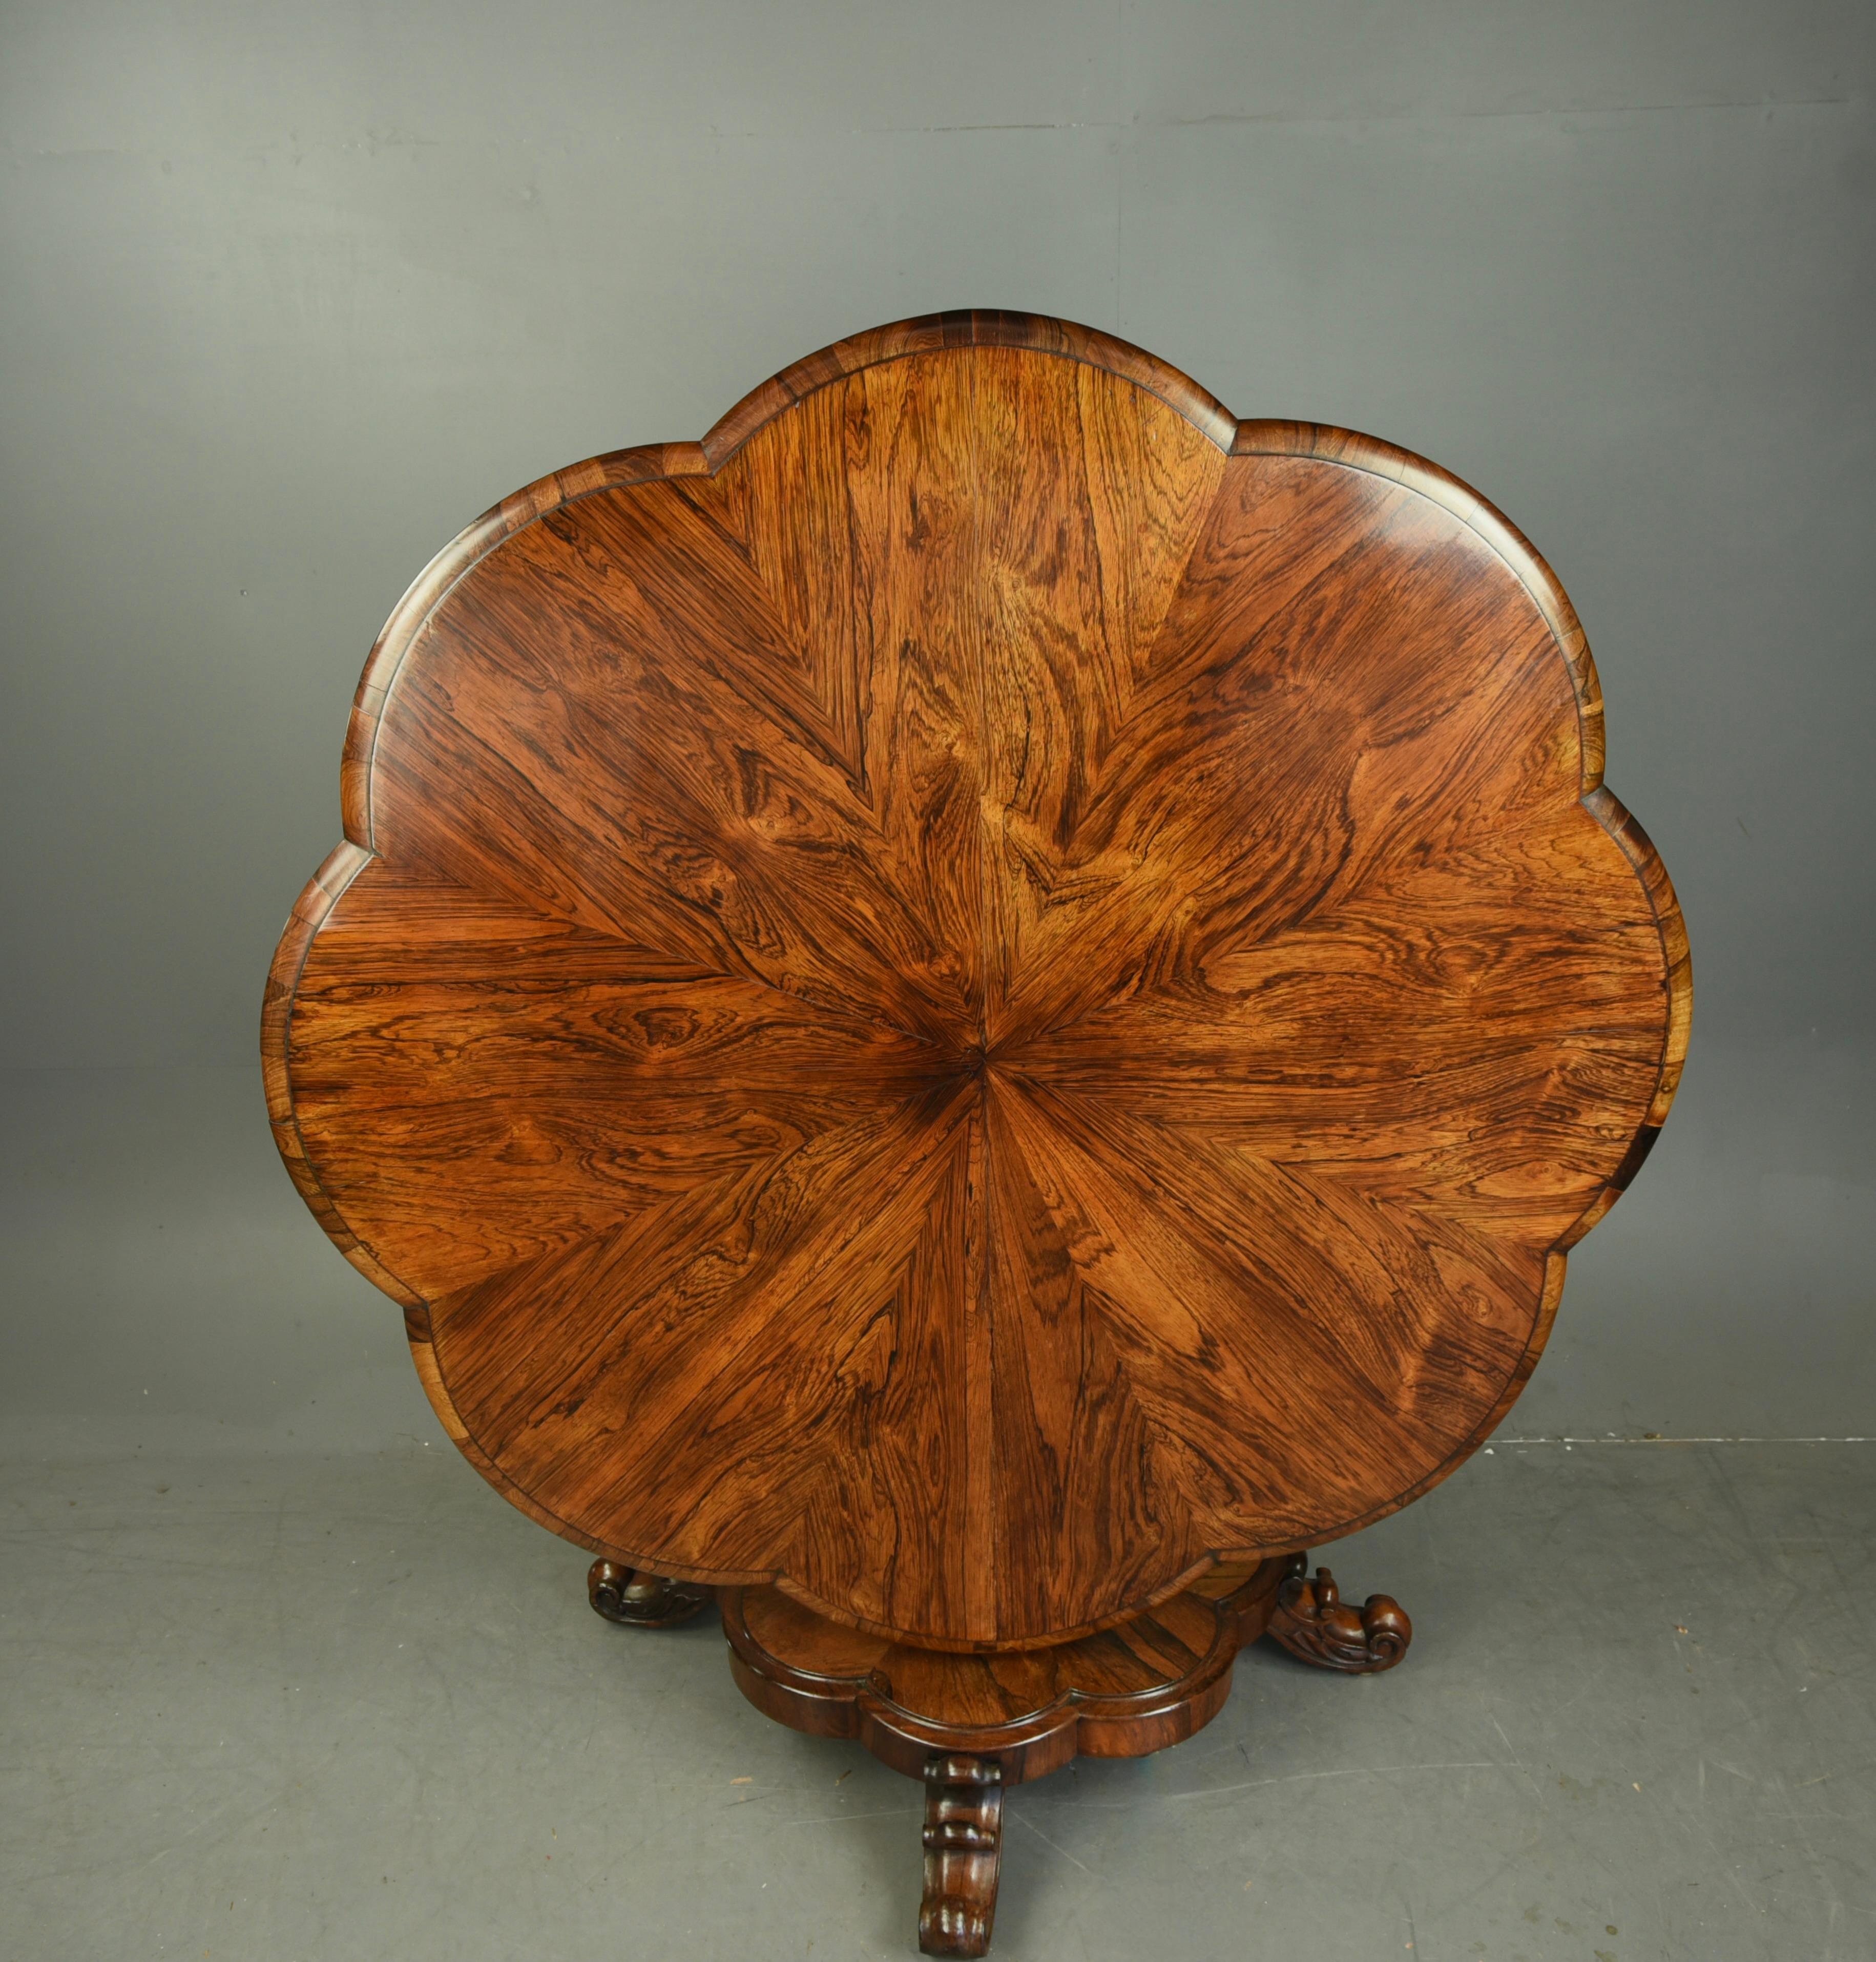 Fantastic Quality circular unique shaped Rosewood breakfast table ,
The top has a wonderful unusual shape with a fantastic grain and colour ,with a tilt top action standing on a conforming base with four scroll carved feet with hidden castors .
It